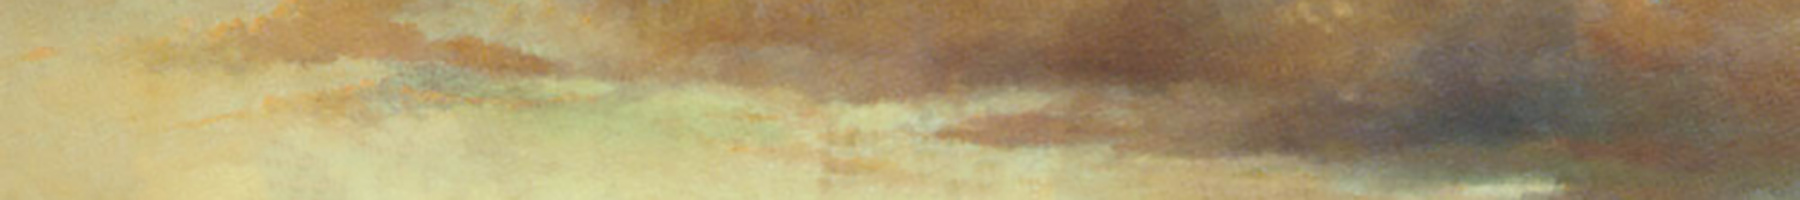 clouds at sunset oil painting detail